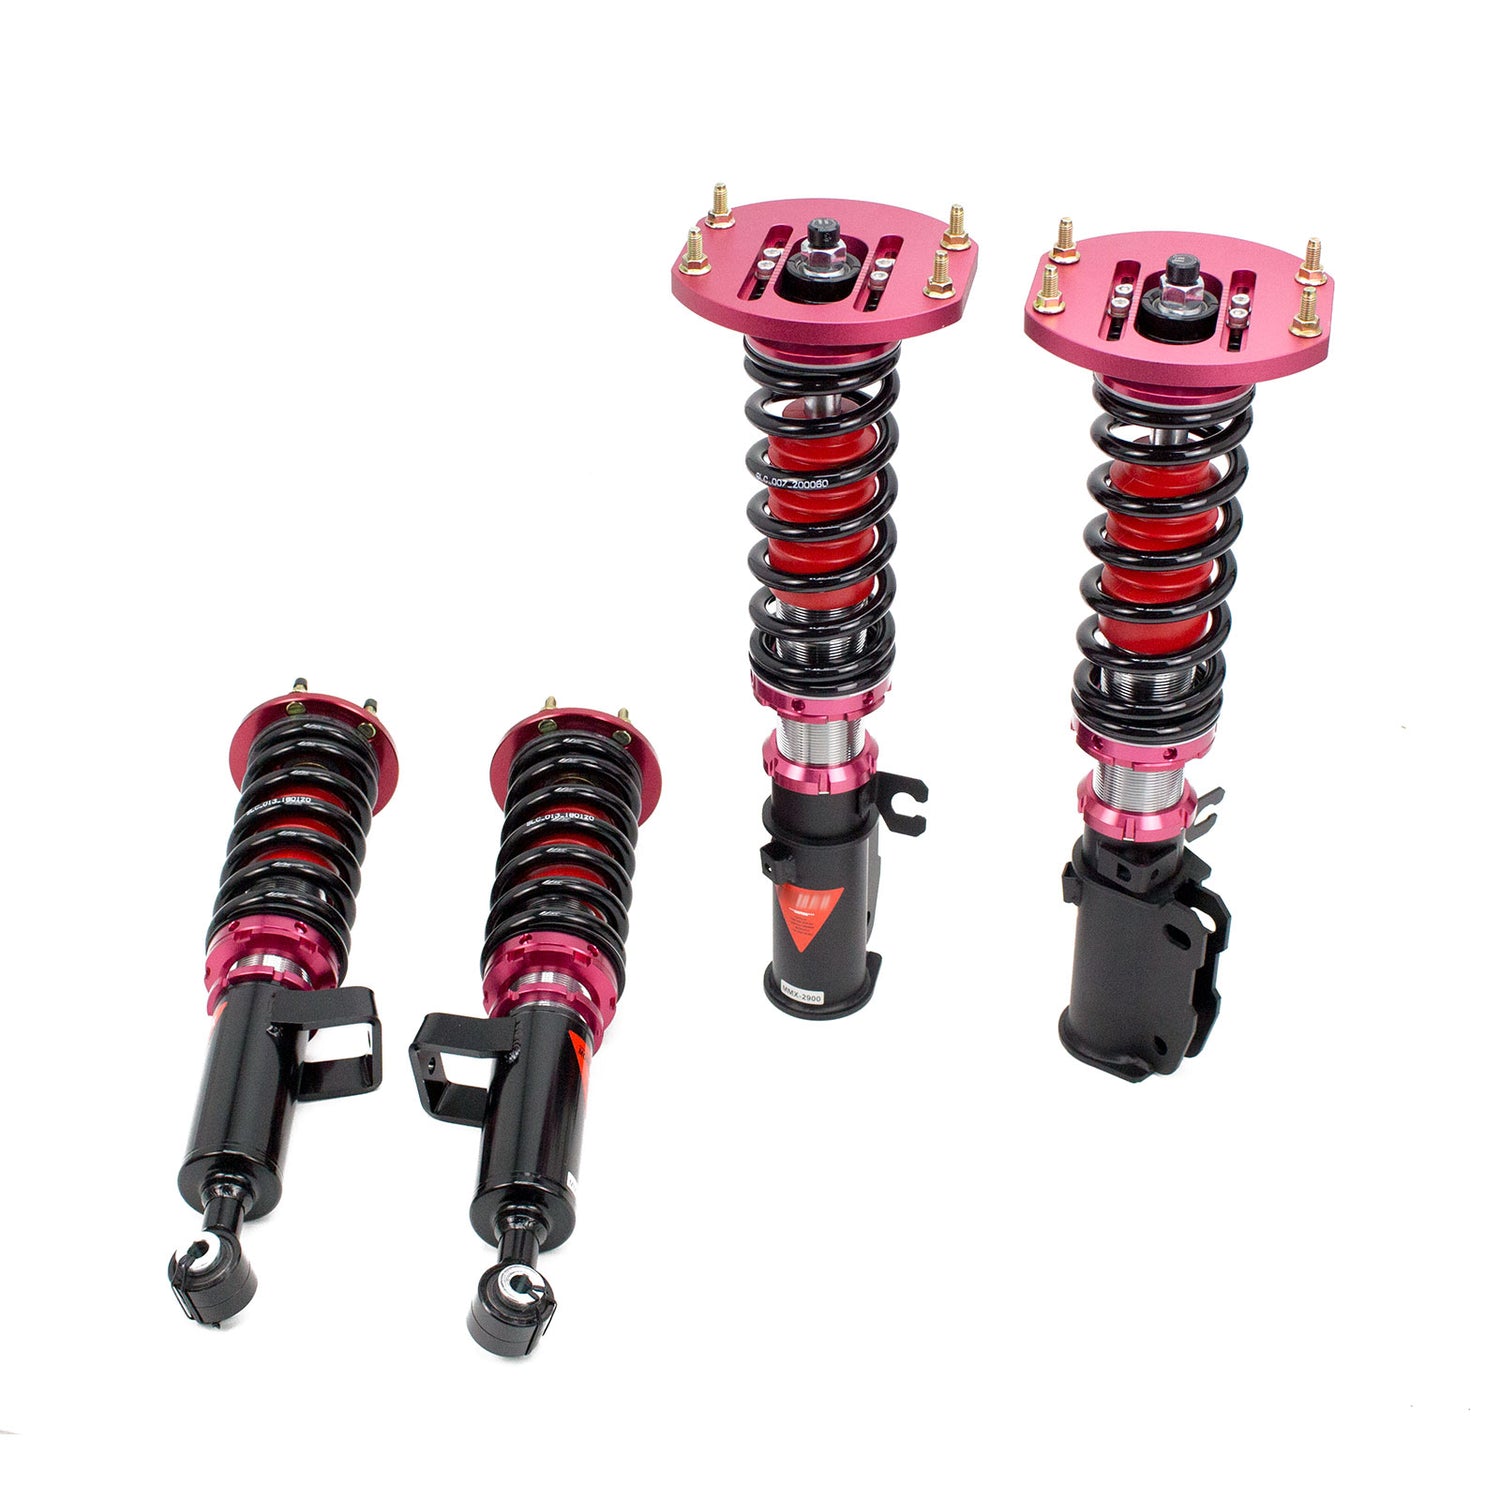 MMX2900 MAXX Coilovers Lowering Kit, Fully Adjustable, Ride Height, 40 Clicks Rebound Settings, Porsche Carrera 2 93-98 (993)